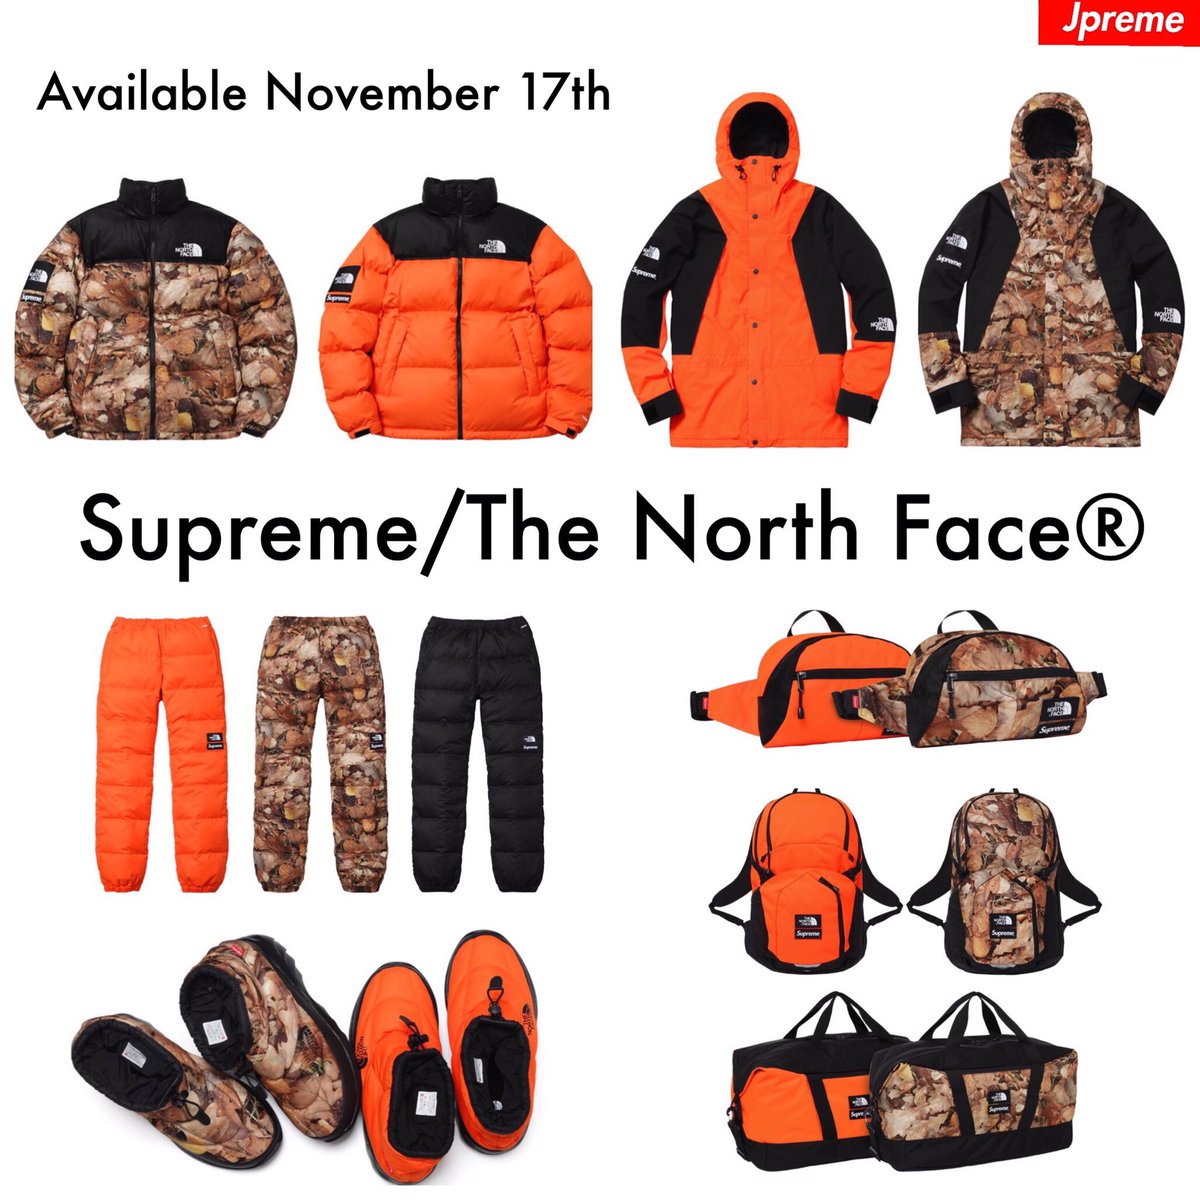 Supreme x North Face for FW16! Dropping 